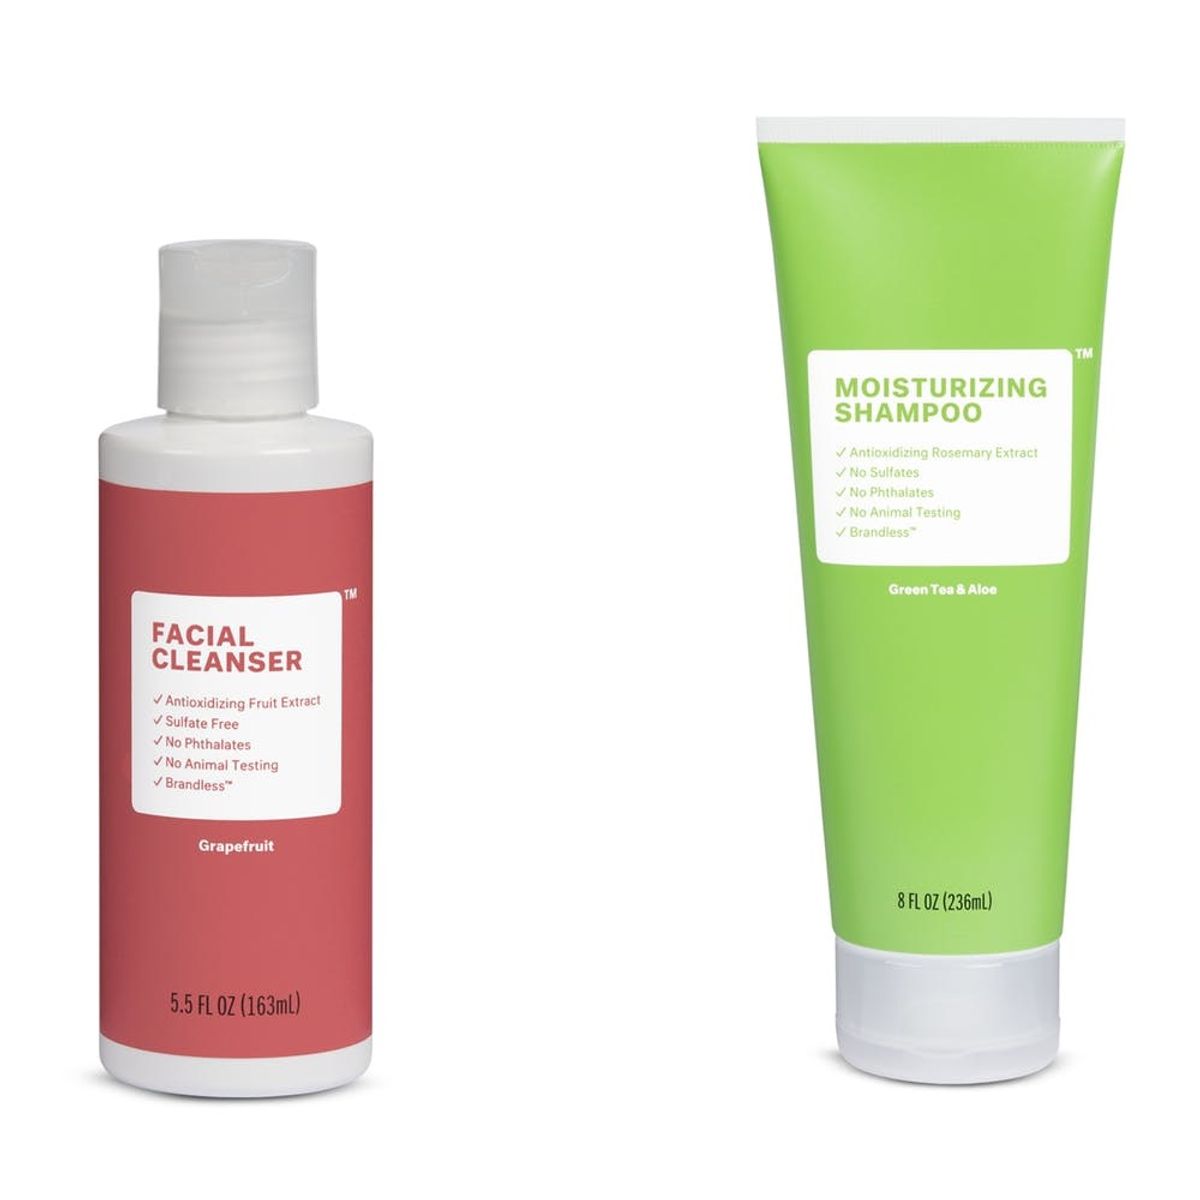 Every Product from Brandless’ New Beauty Collection Is Just $3